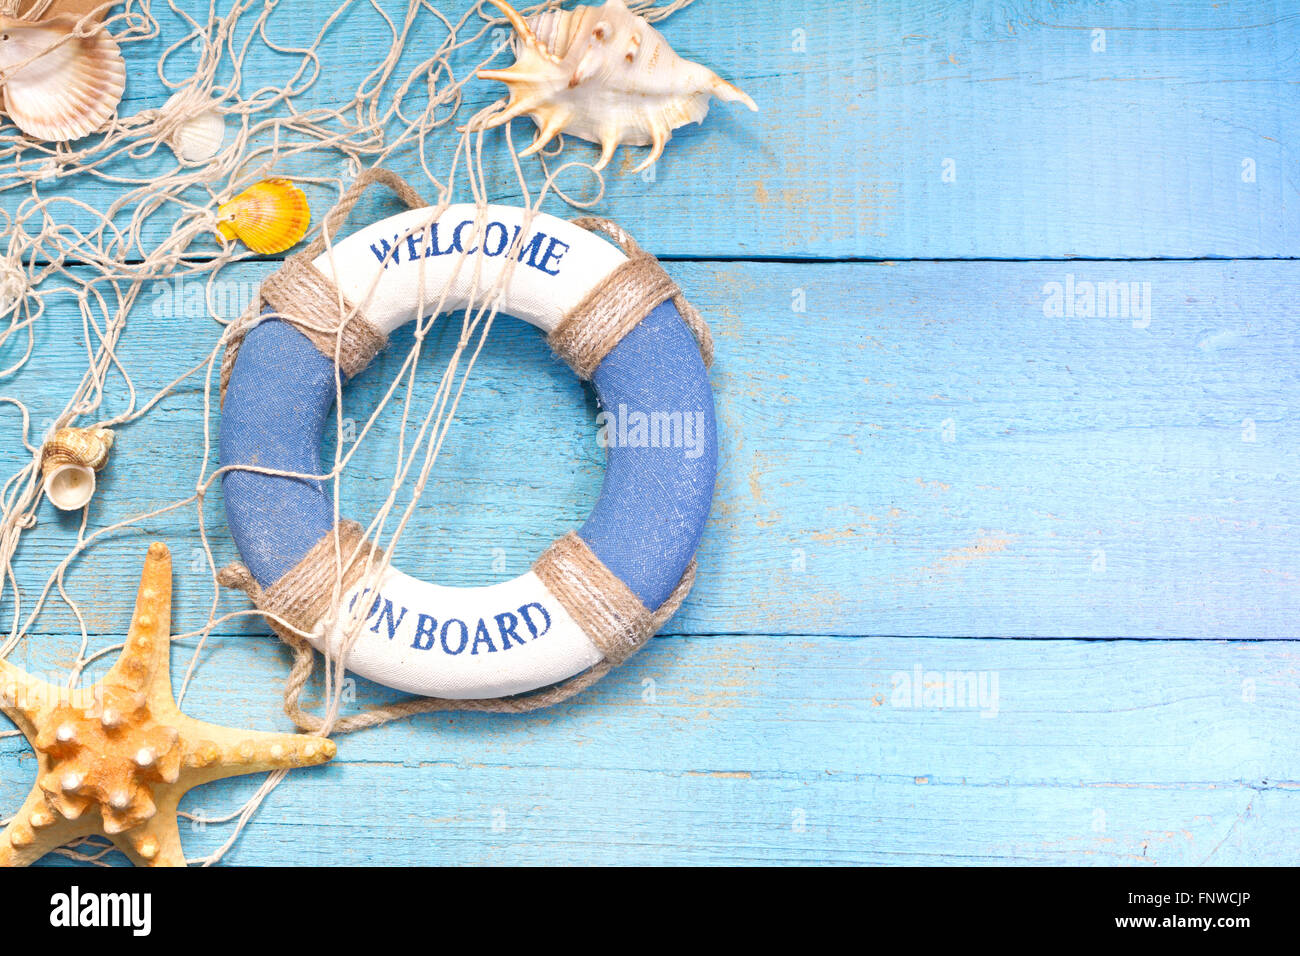 Beach holiday marine travel background concept on blue boards with shells Stock Photo